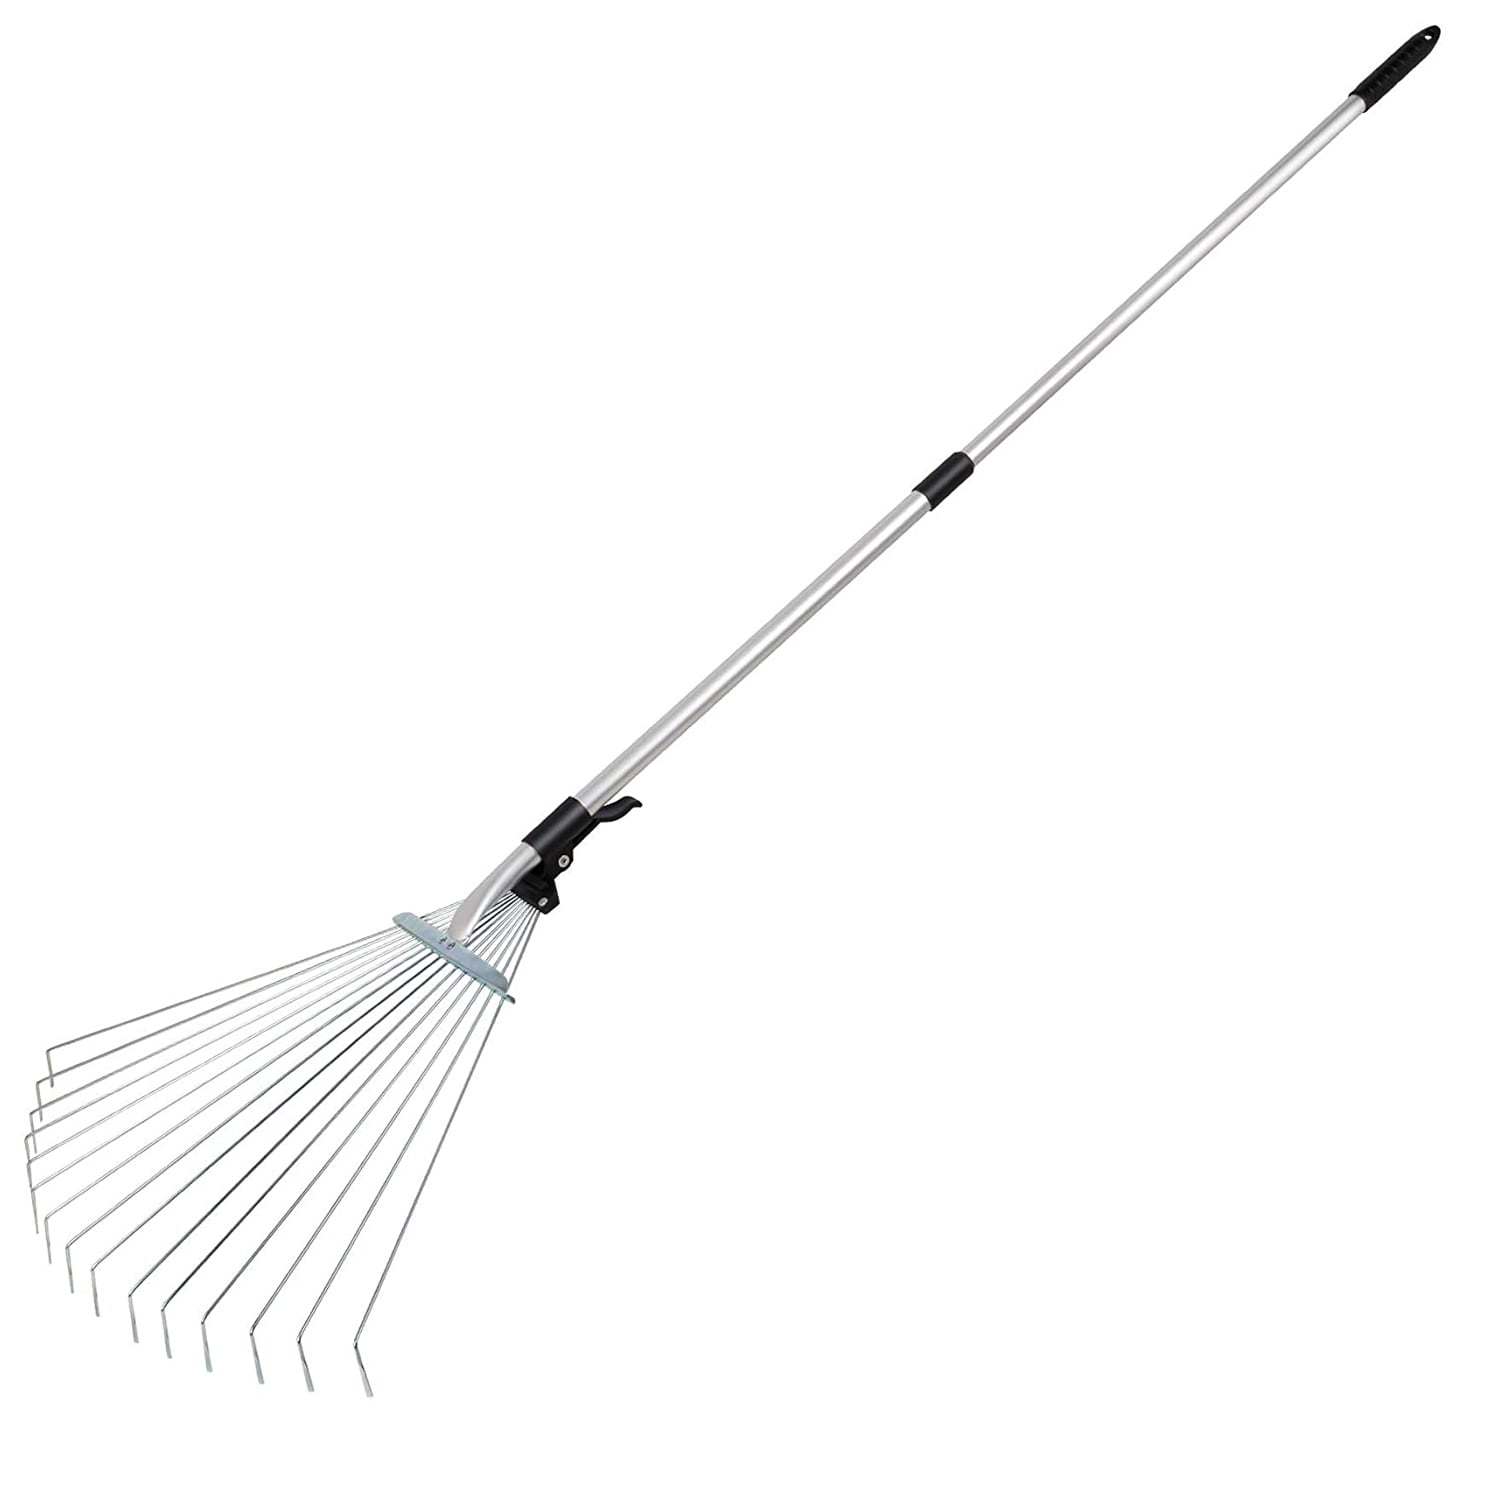 Kings County Tools Adjustable Garden and Leaf Rake with Extendable Handle and Tines 